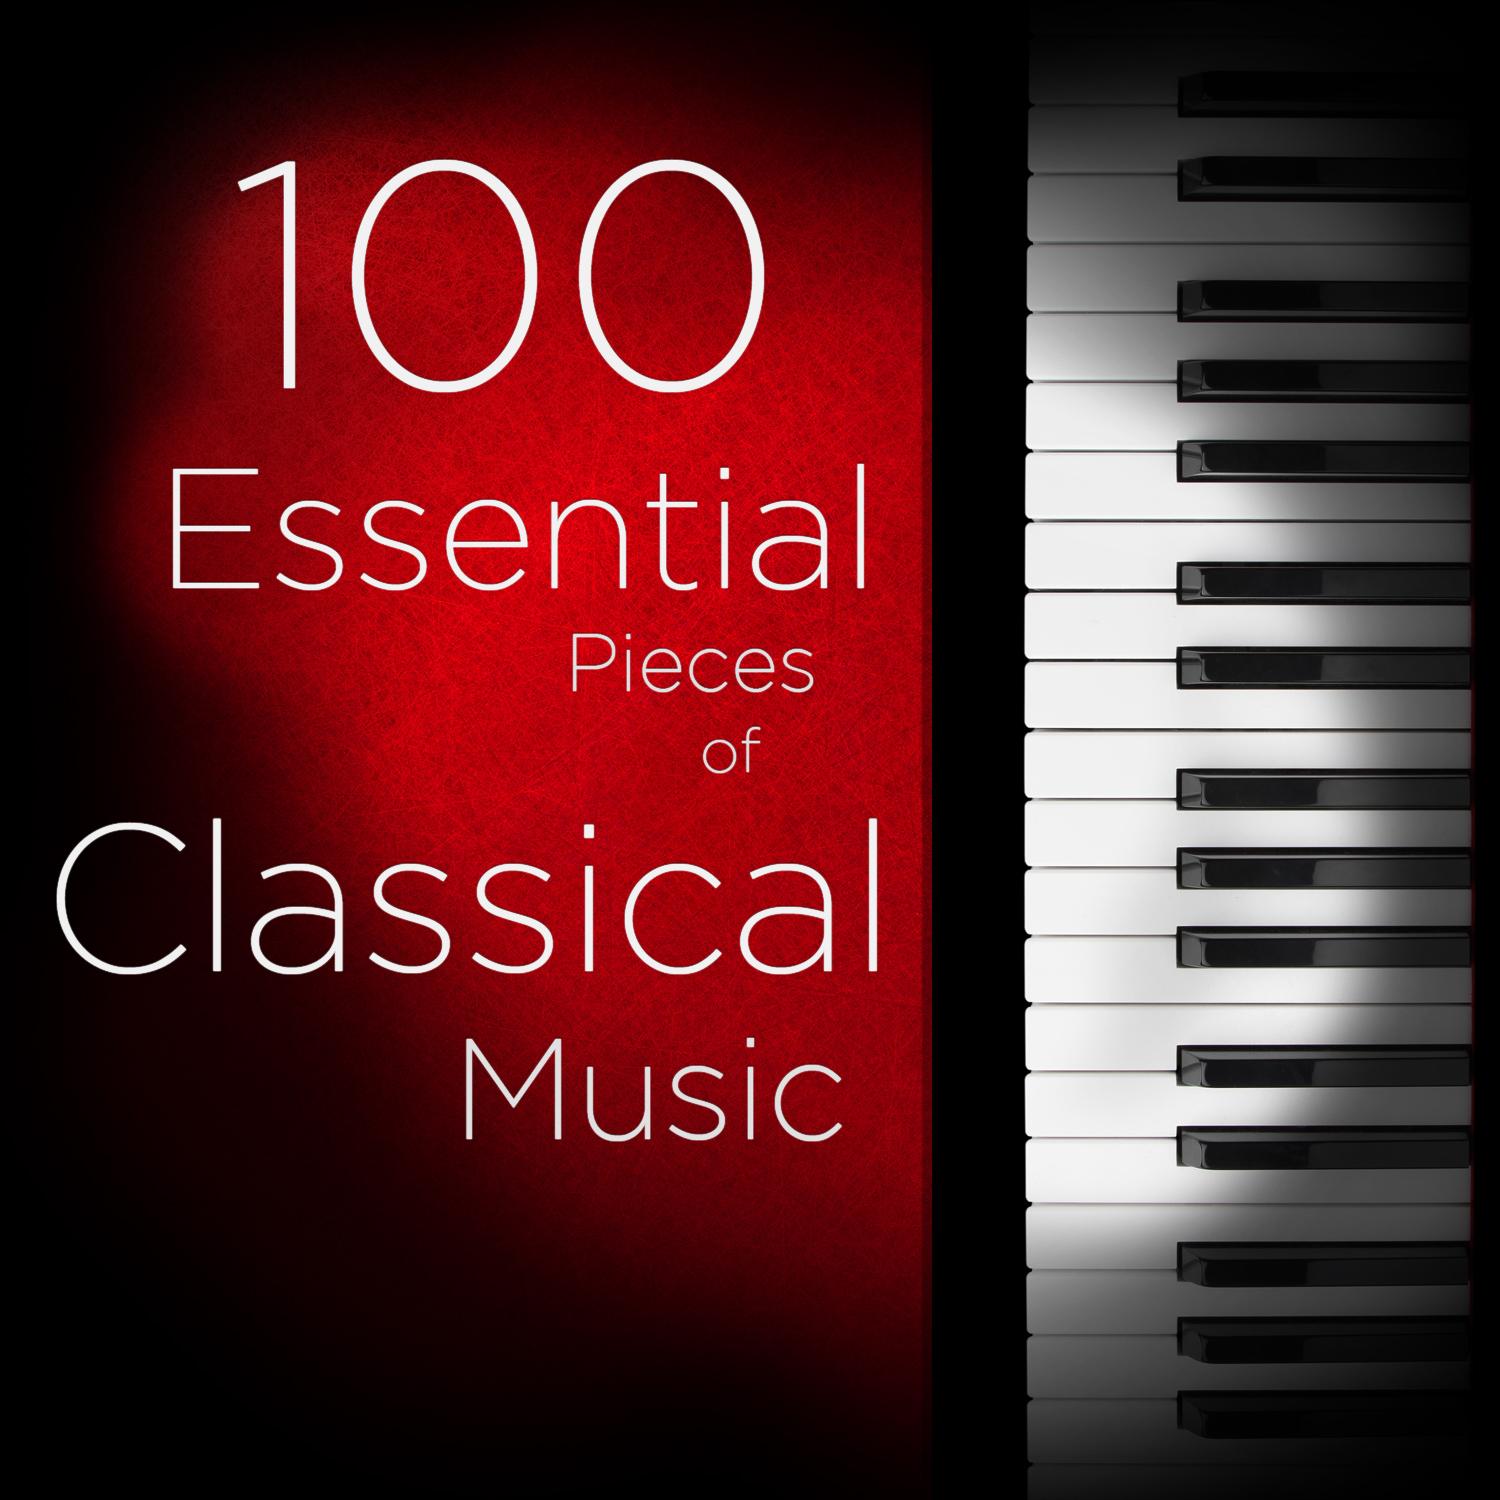 100 Essential Pieces of Classical Music: The Very Best of Mozart, Bach, Beethoven, and more, Including Symphonies, Concertos, Chamber Music, Violin, and Piano